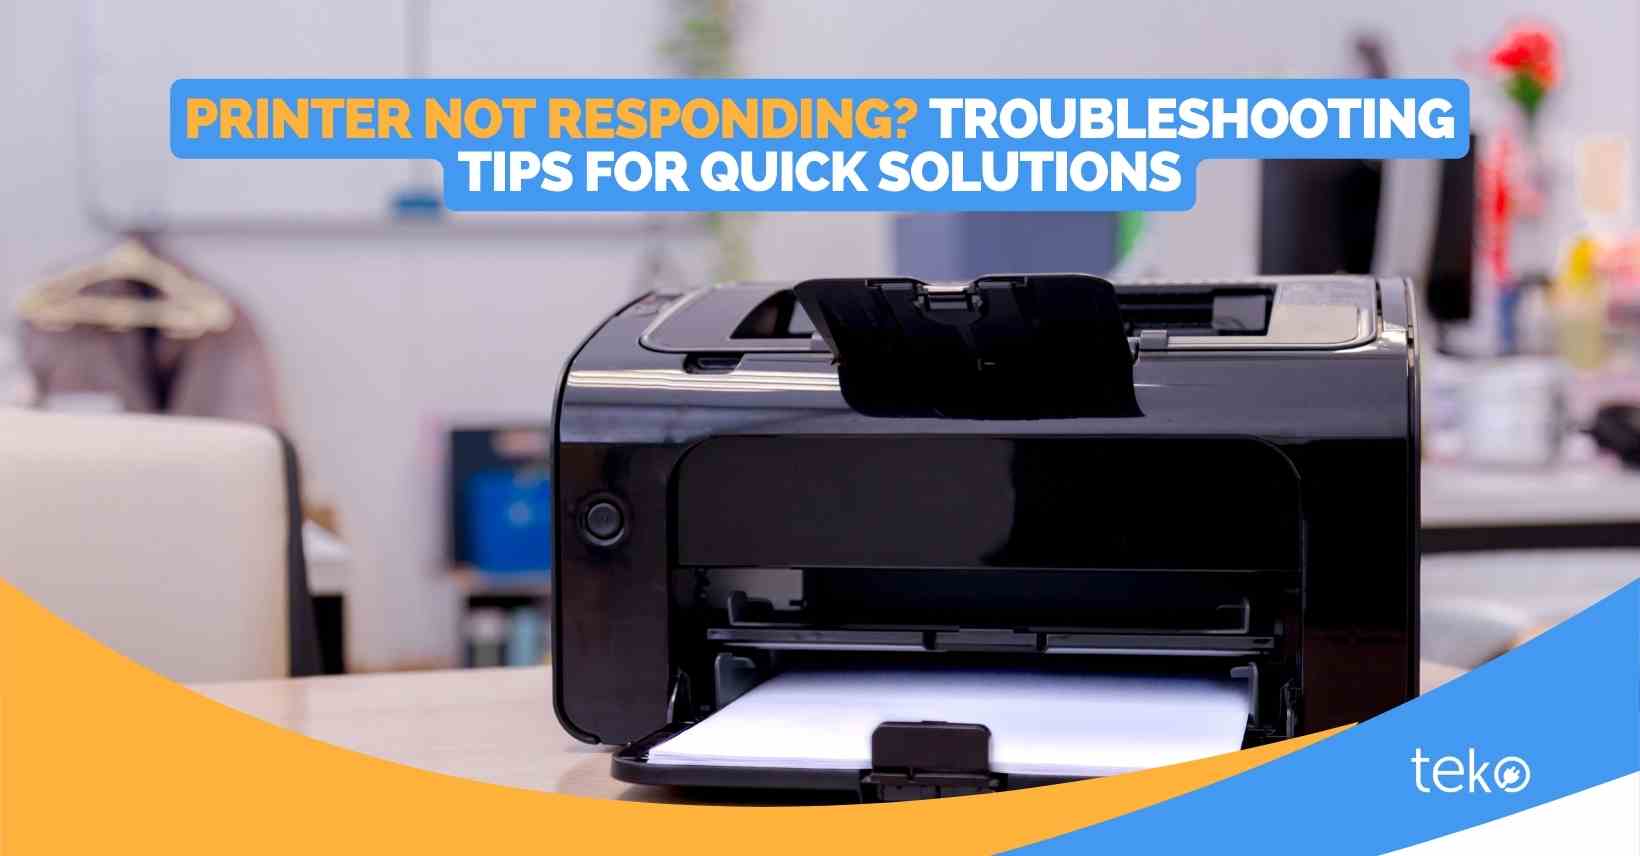  A black and white image of a printer with the message "Printer Not Responding? Troubleshooting Tips for Quick Solutions" written on the right side.